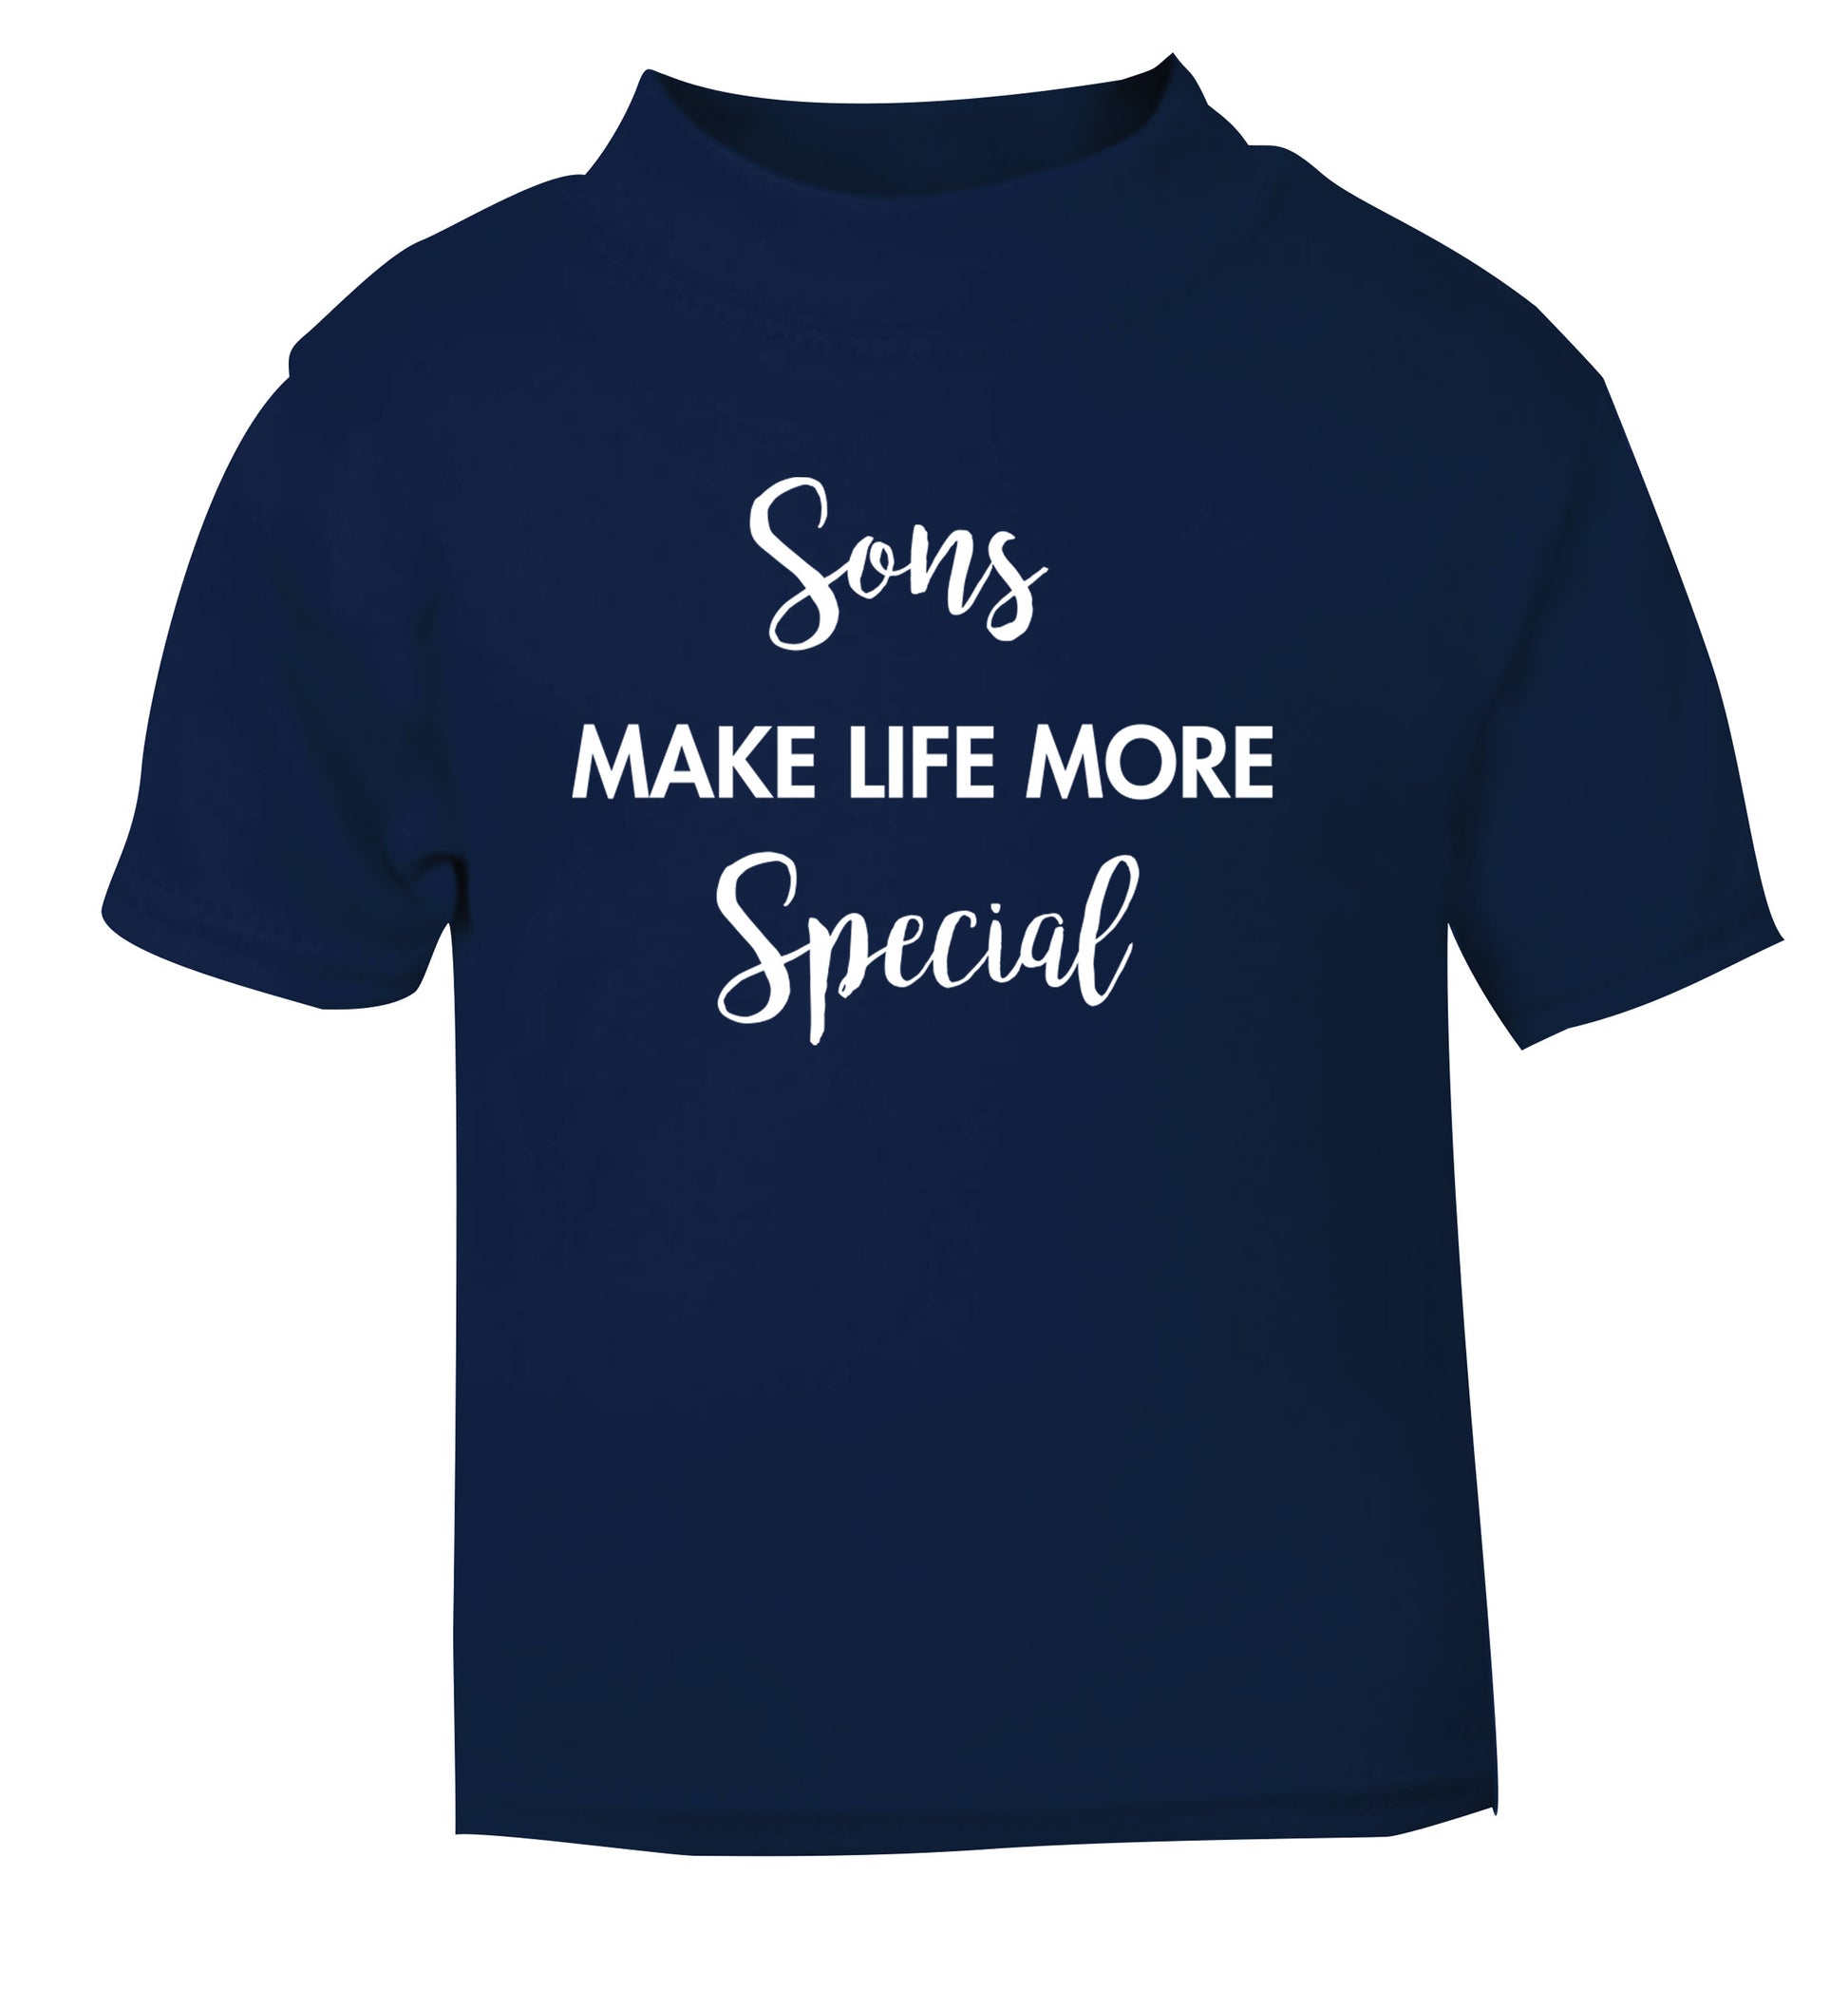 Sons make life more special navy Baby Toddler Tshirt 2 Years